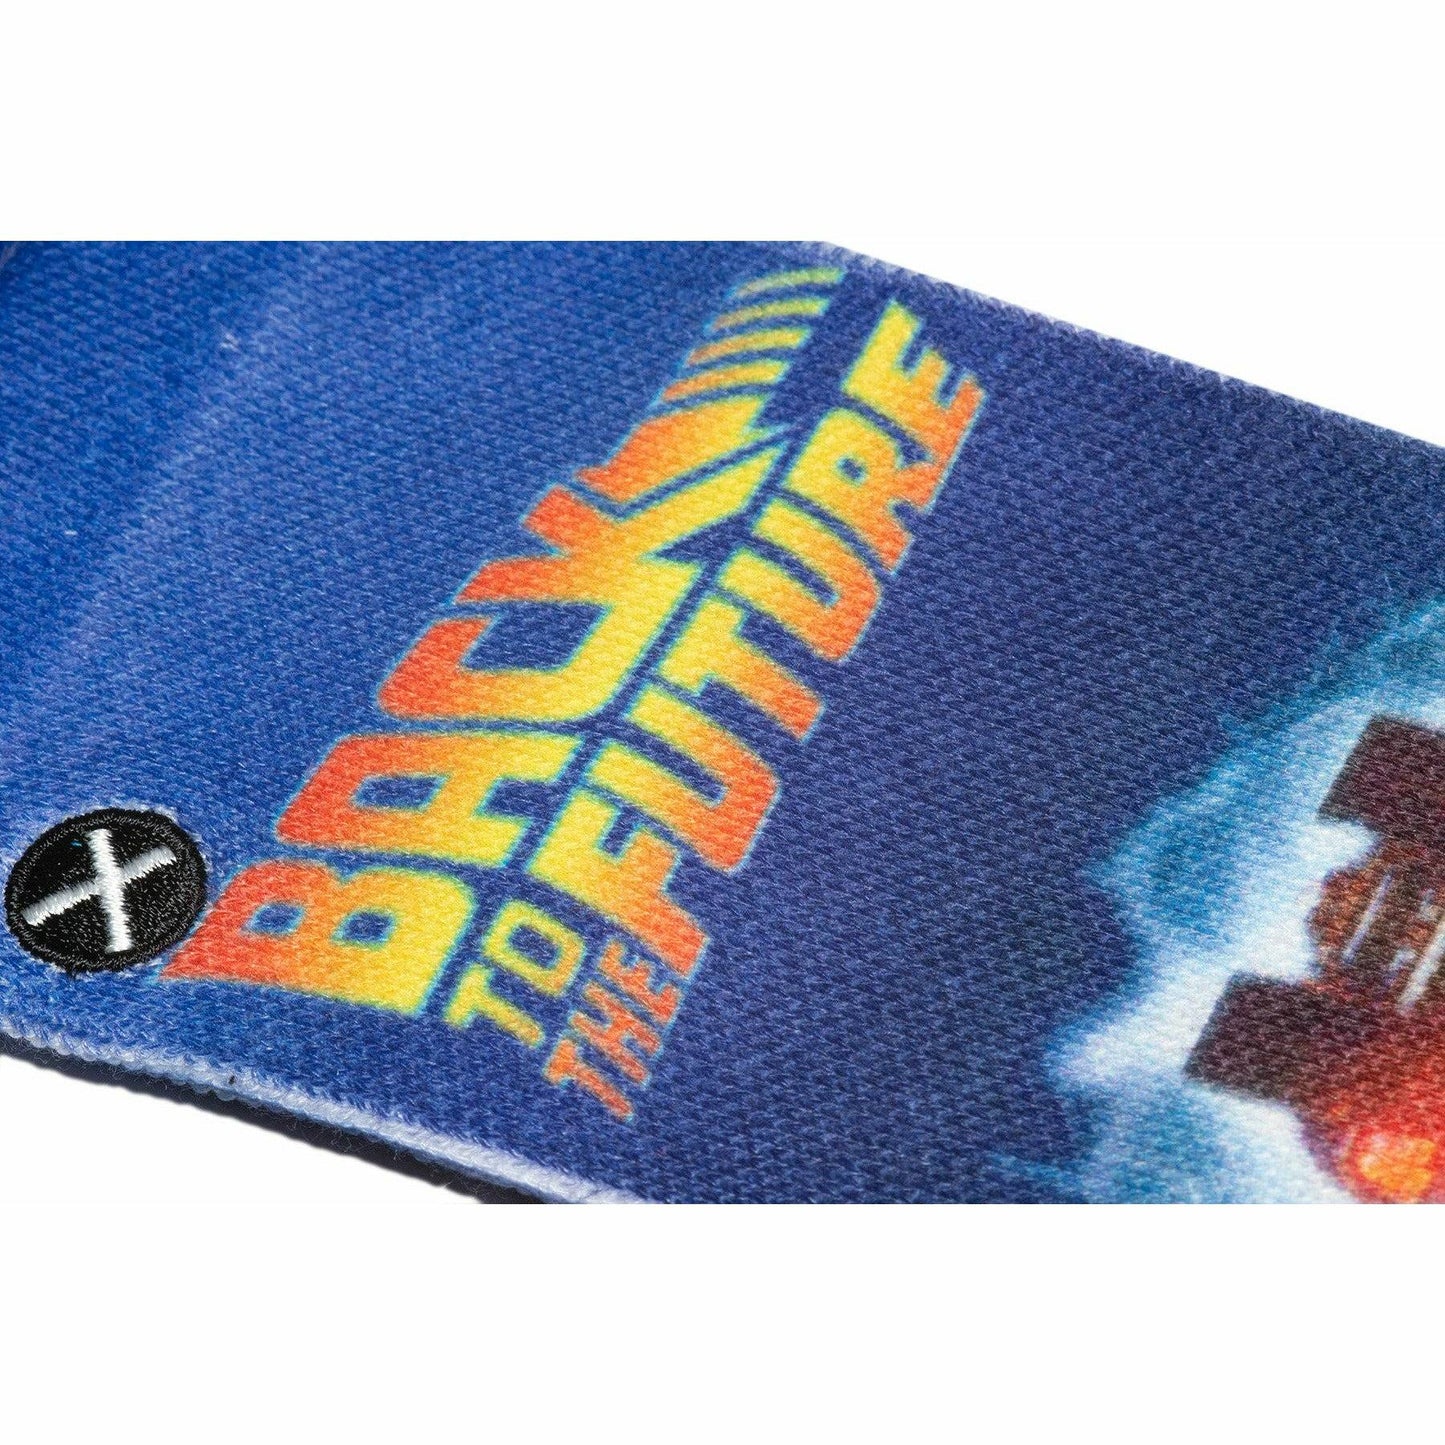 Back to the Future "Back in Time" Men's Crew Straight Down Sublimation Socks (Size 8-12)